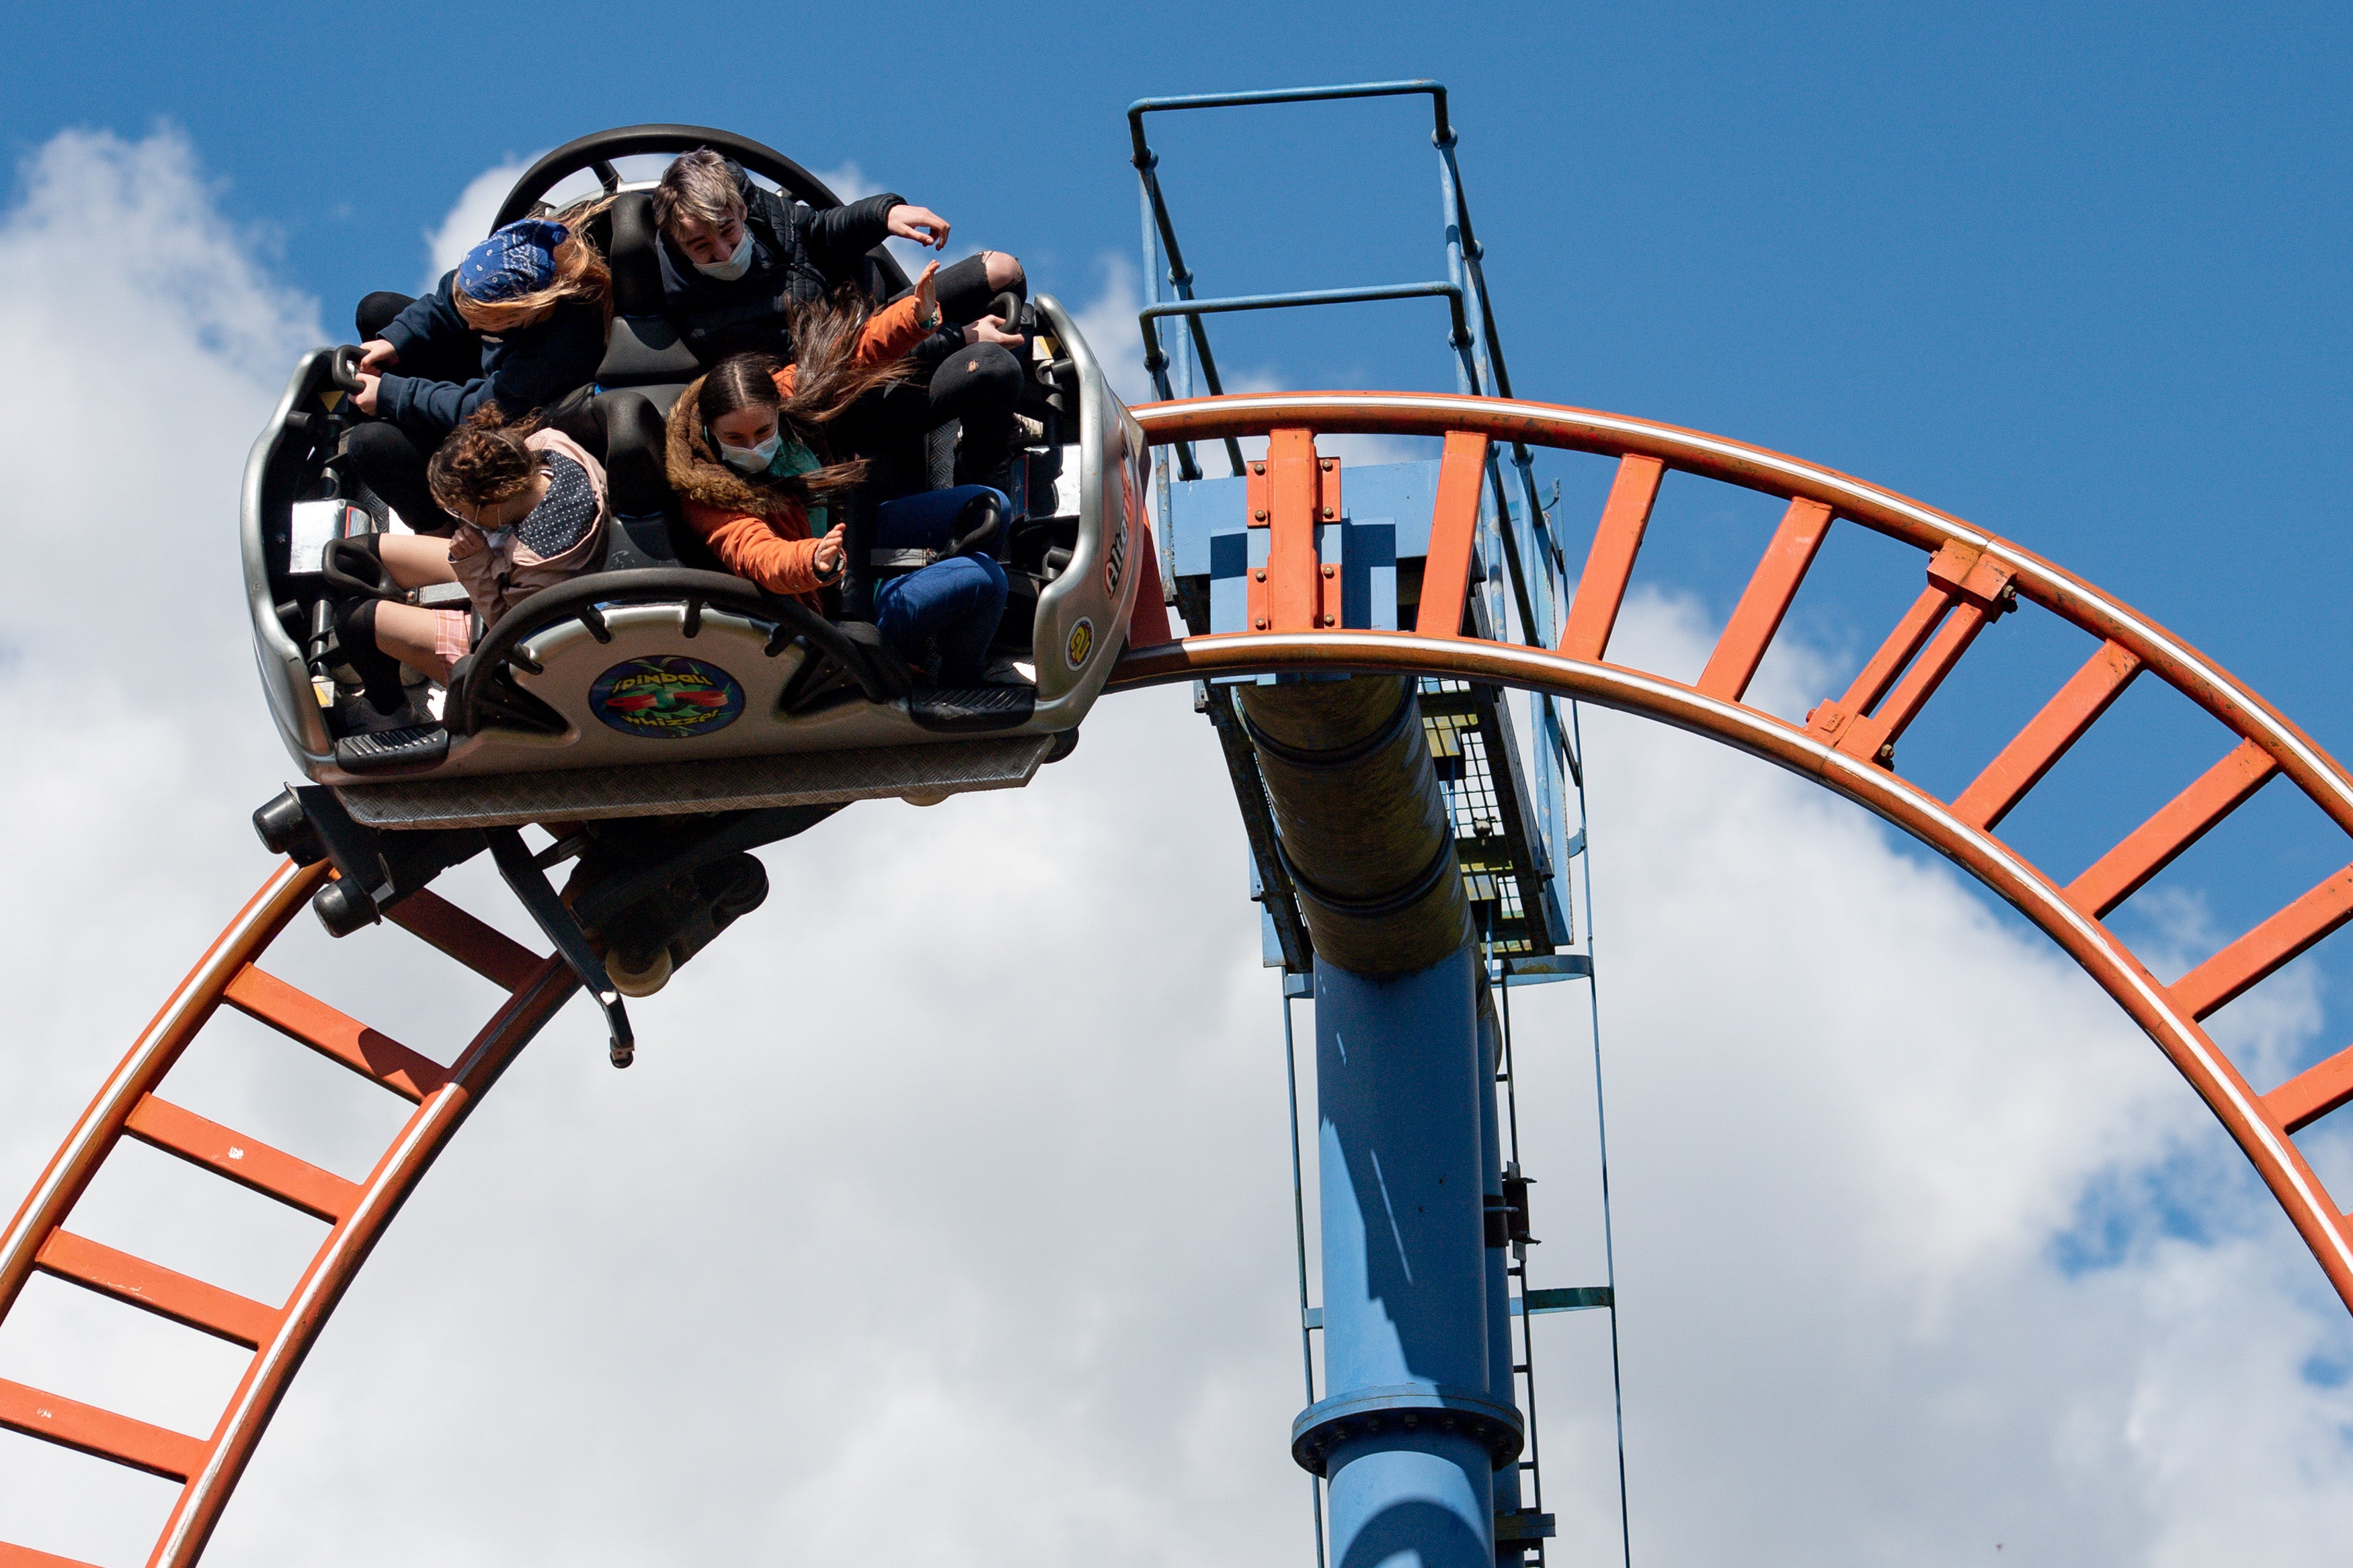 The owners of Alton Towers have asked the Government to hold back on a planned rise in VAT for the tourism sector (Jacob King/PA)